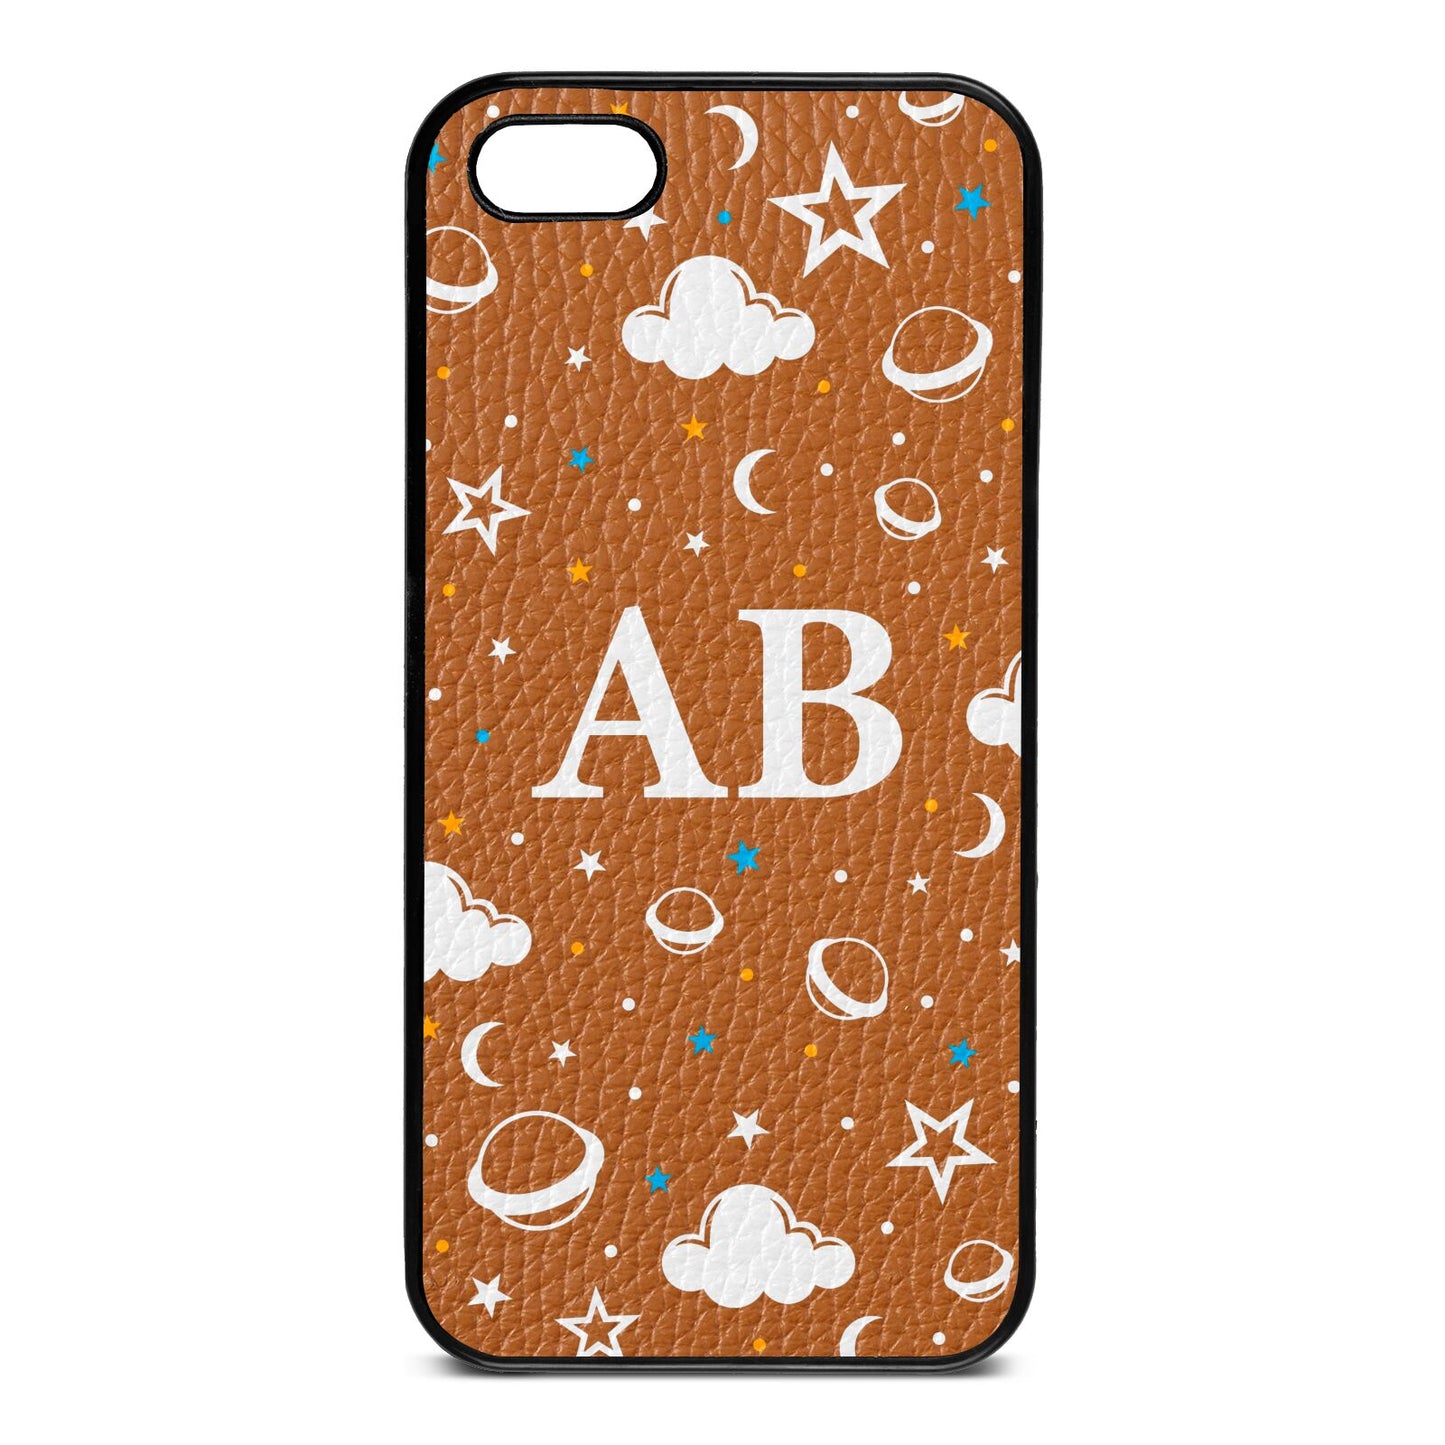 Astronomical Initials Tan Pebble Leather iPhone 5 Case